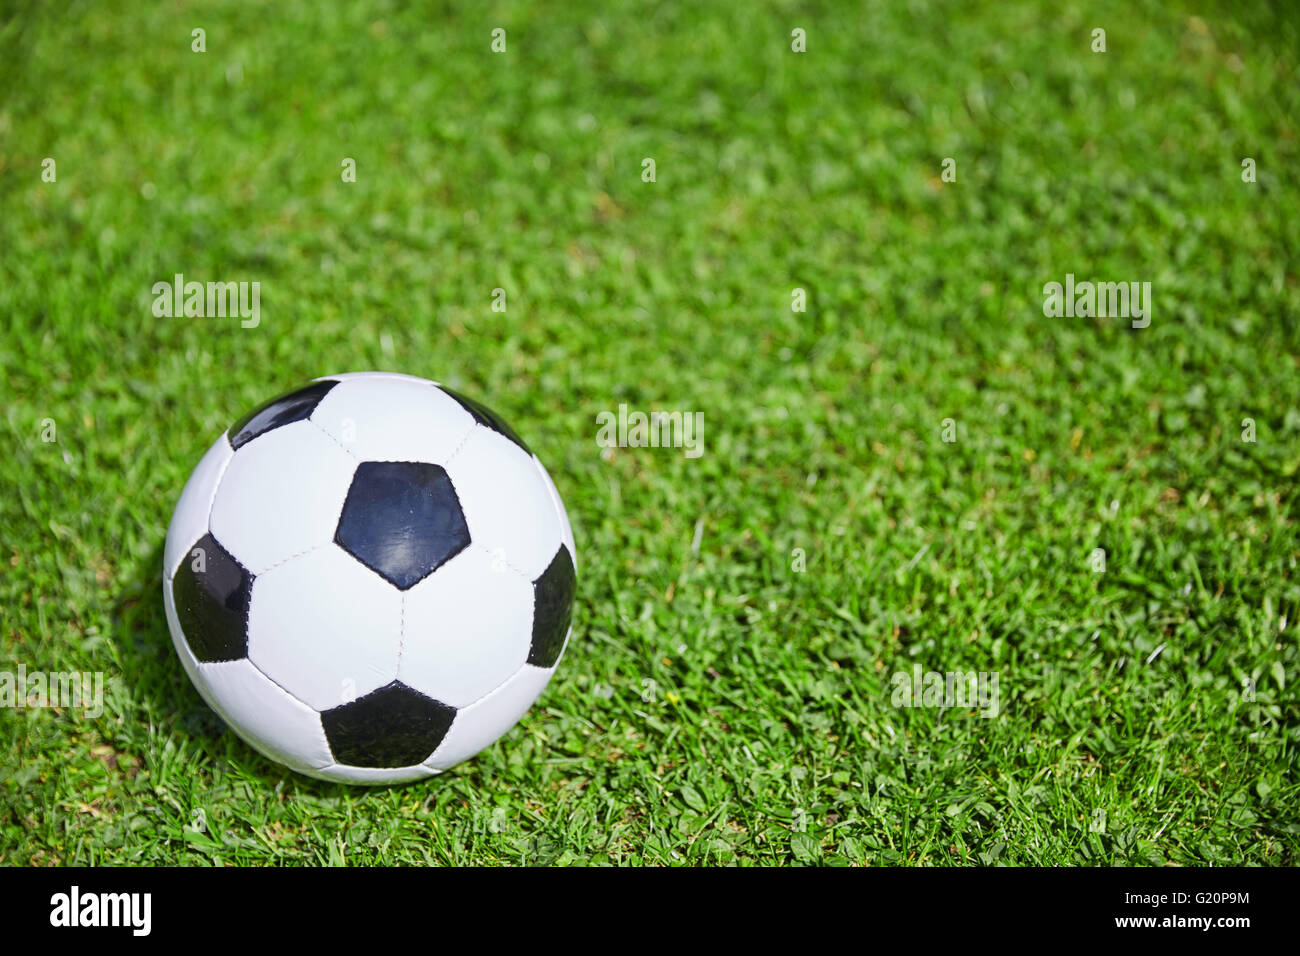 Football lying on the green grass of the soccer field Stock Photo